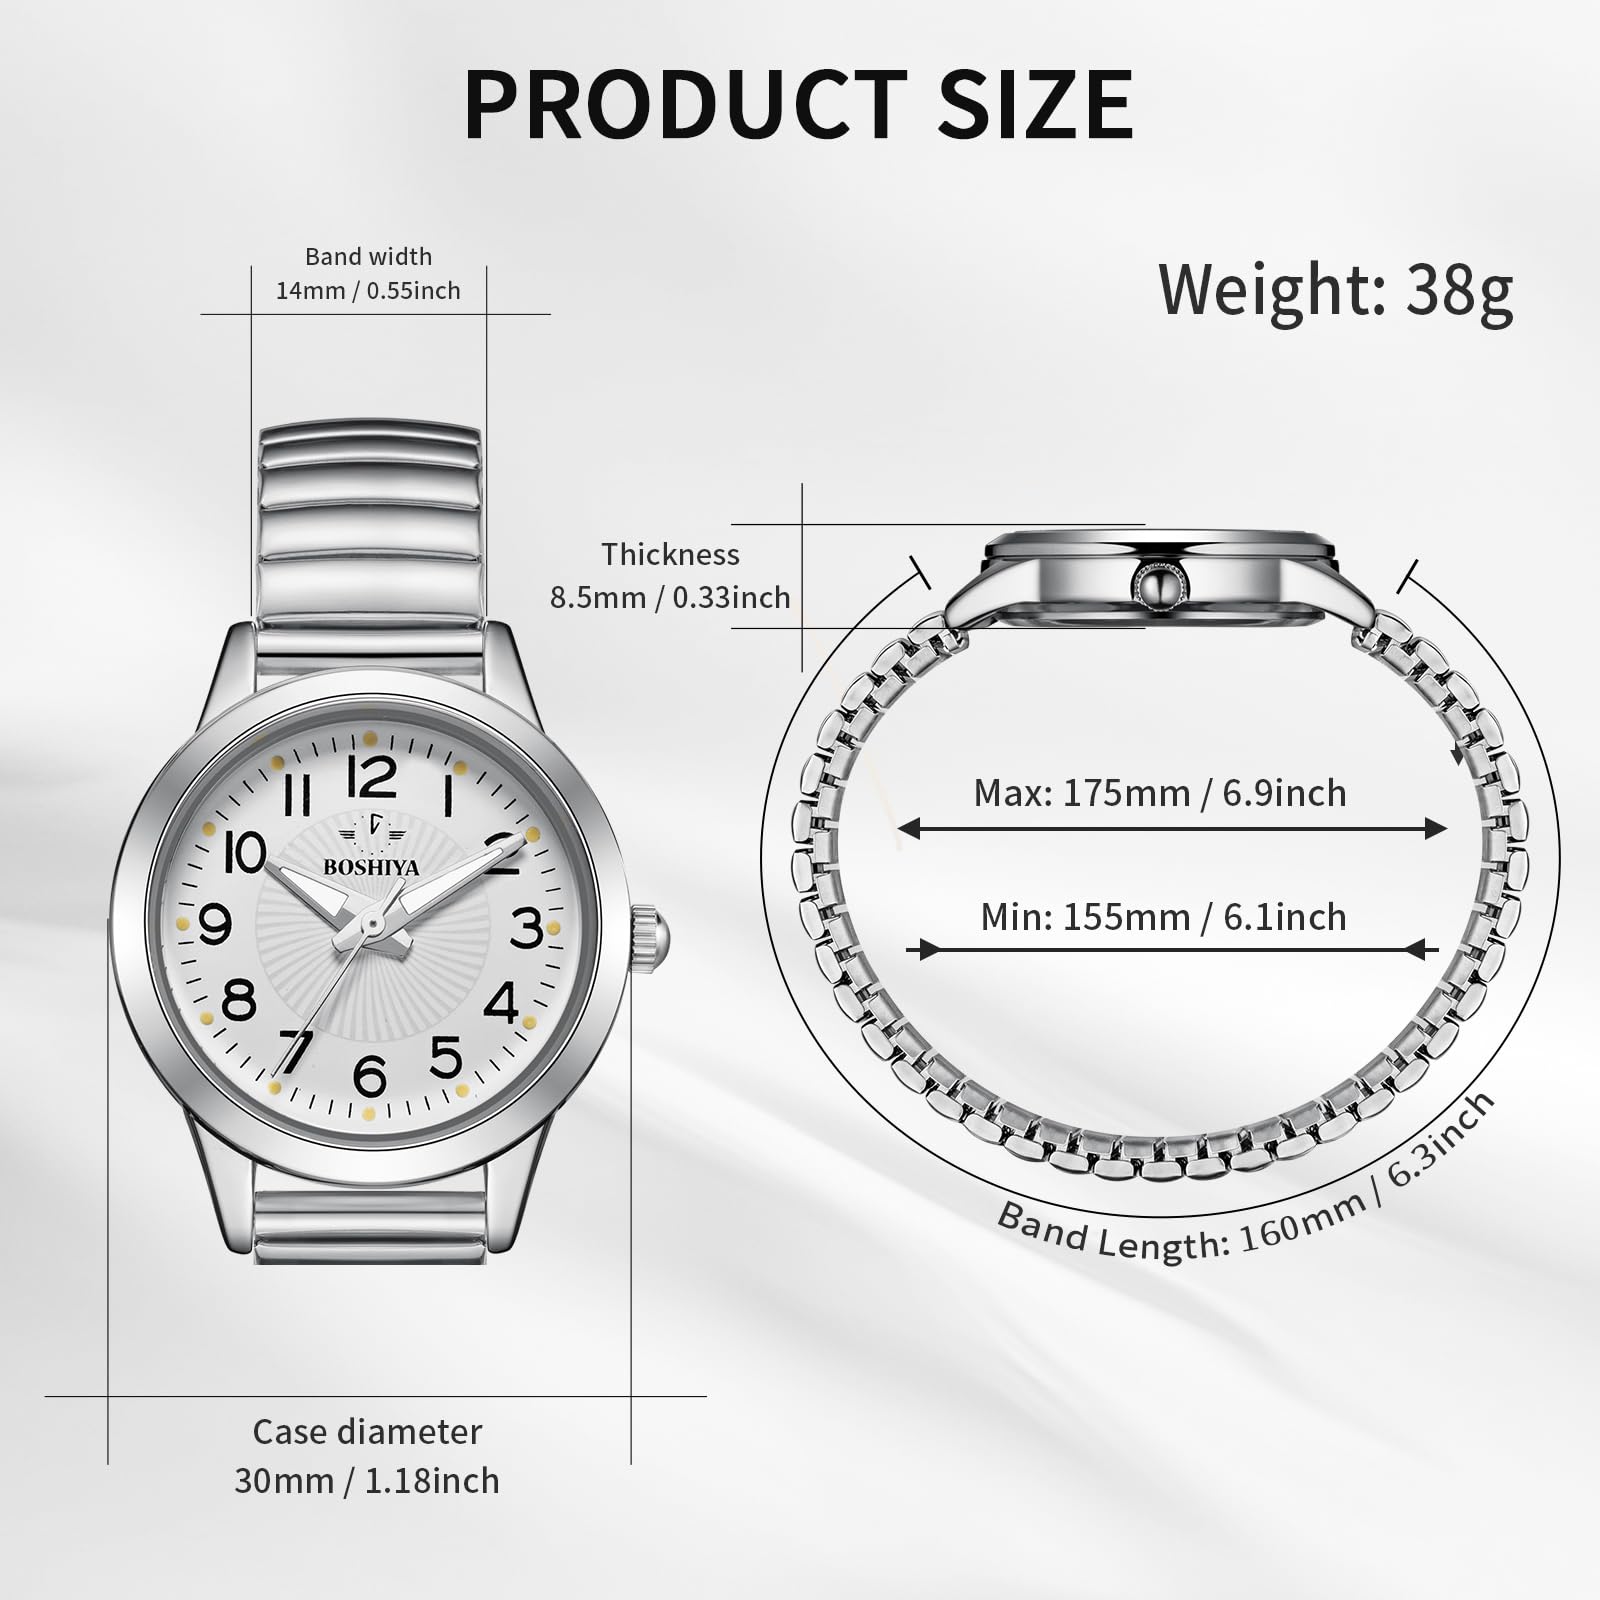 BOSHIYA Watches for Women Stretch Band 30mm Watch Ladies Analog Quartz Stainless Steel Expansion Band Watchs Waterproof Wristwatch for Small Wrist Silver Gold